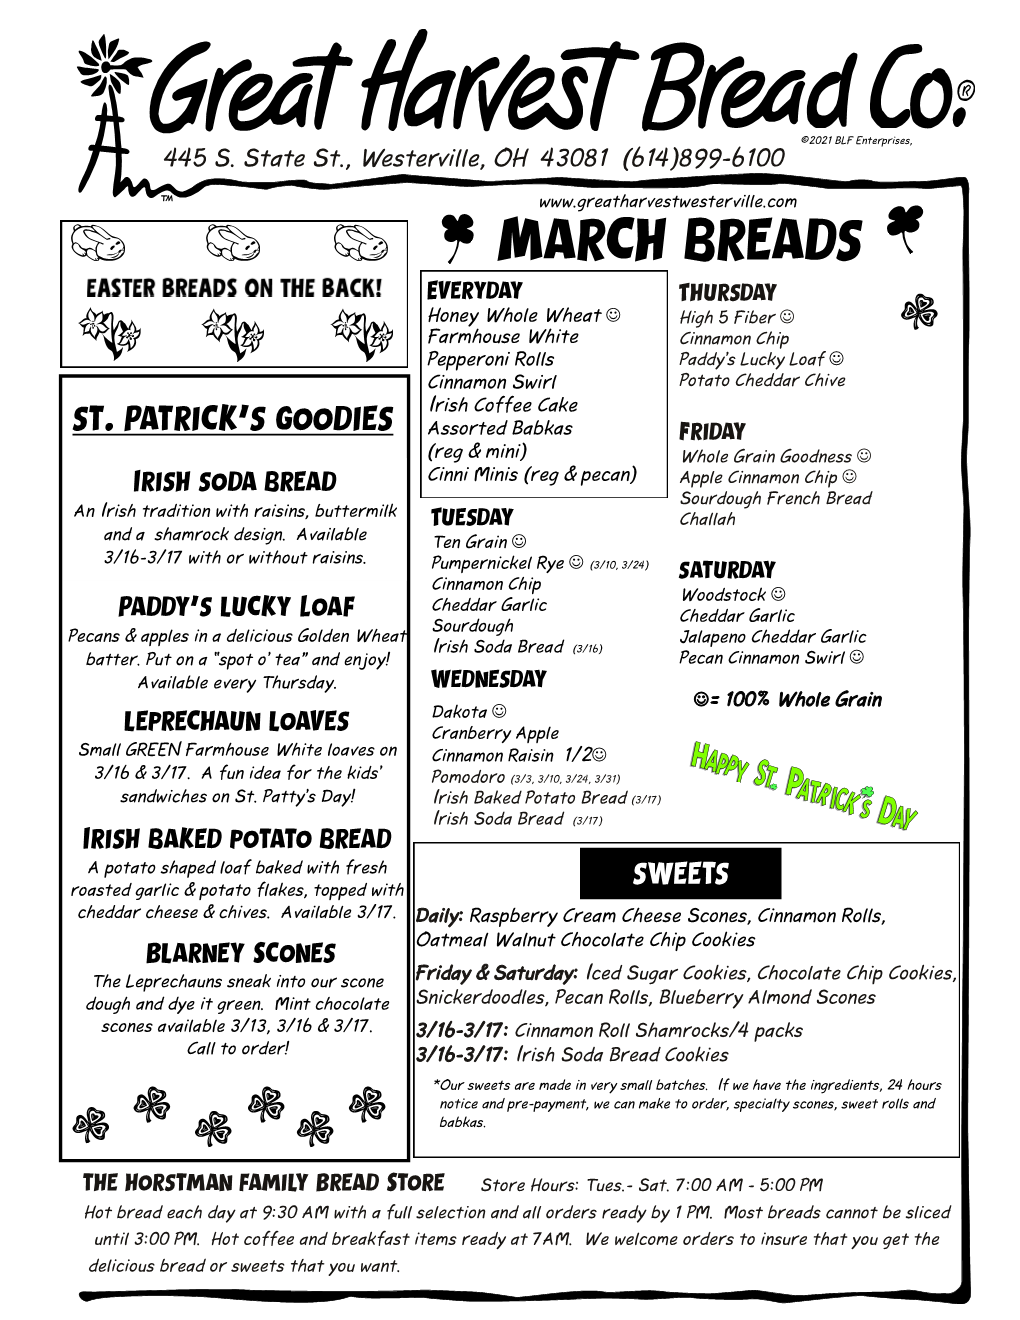 March Breads